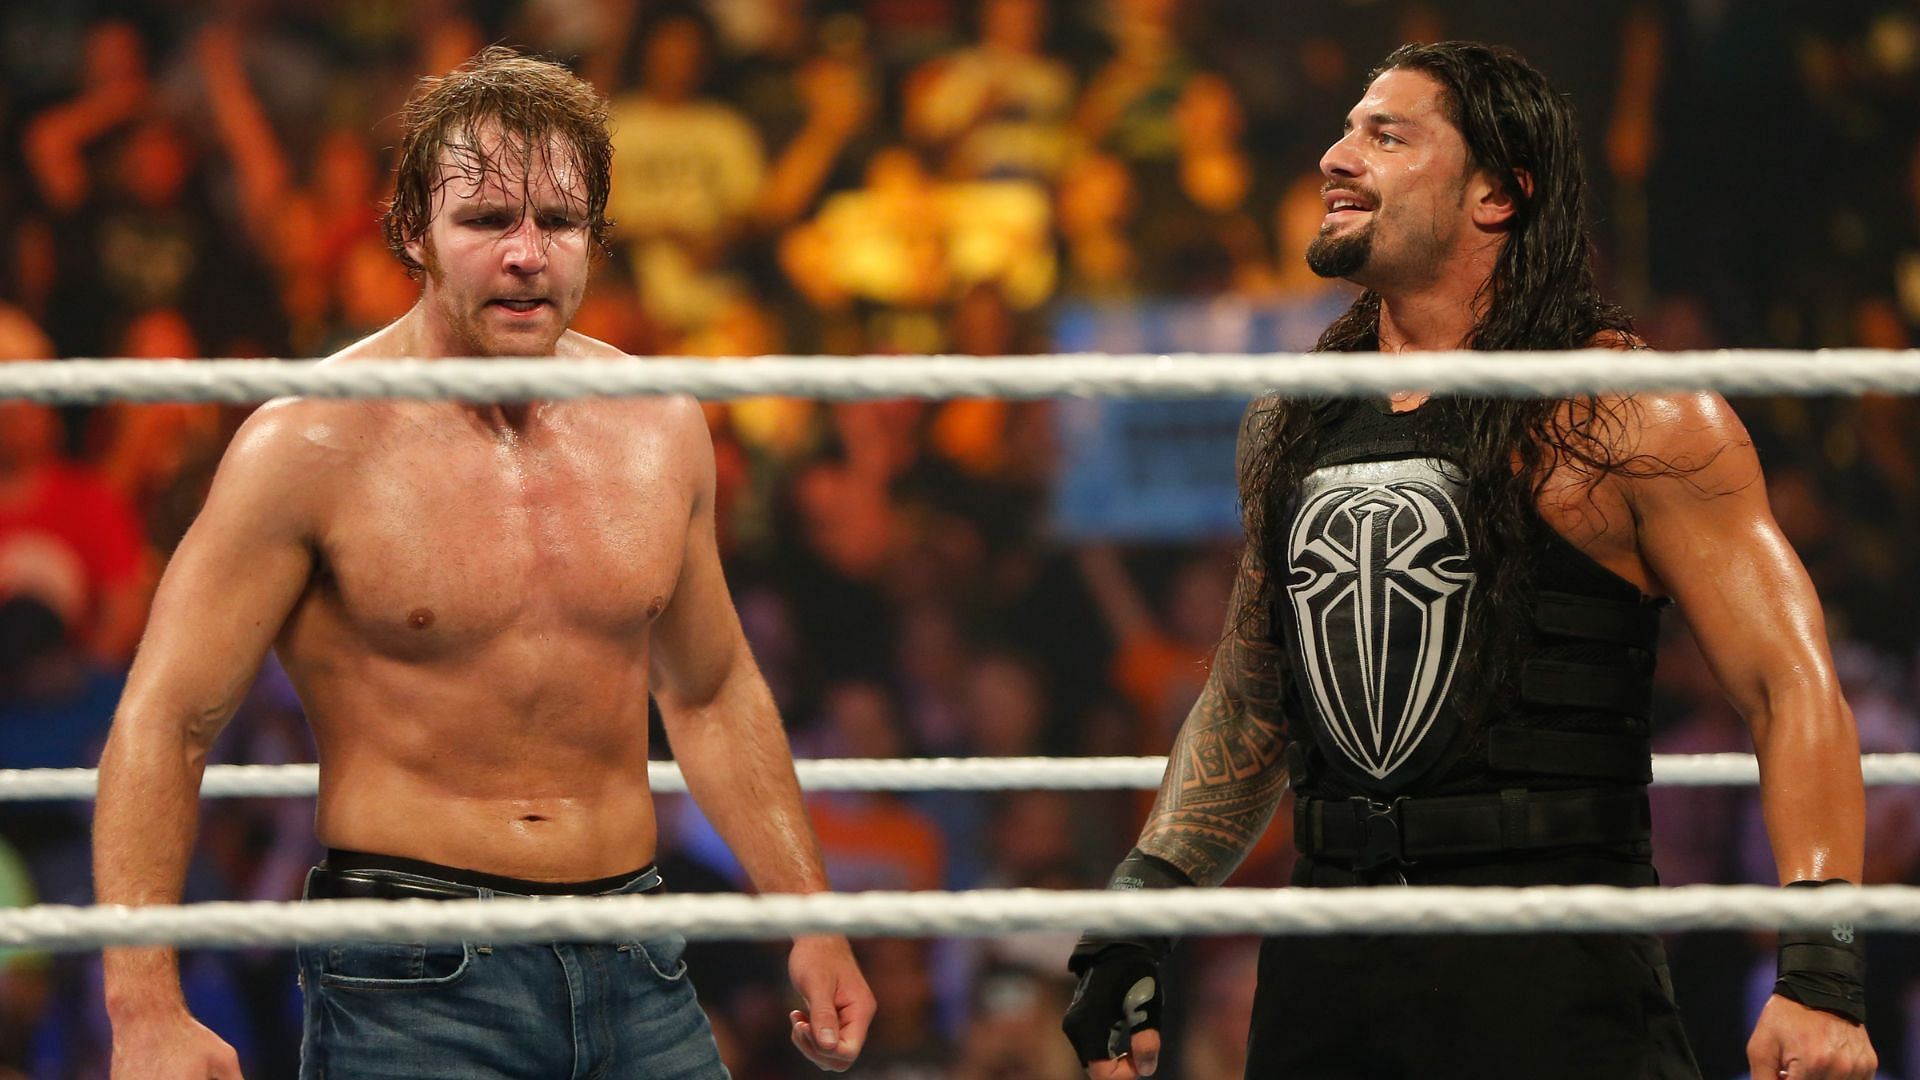 Roman Reigns and Dean Ambrose fought in the trenches together